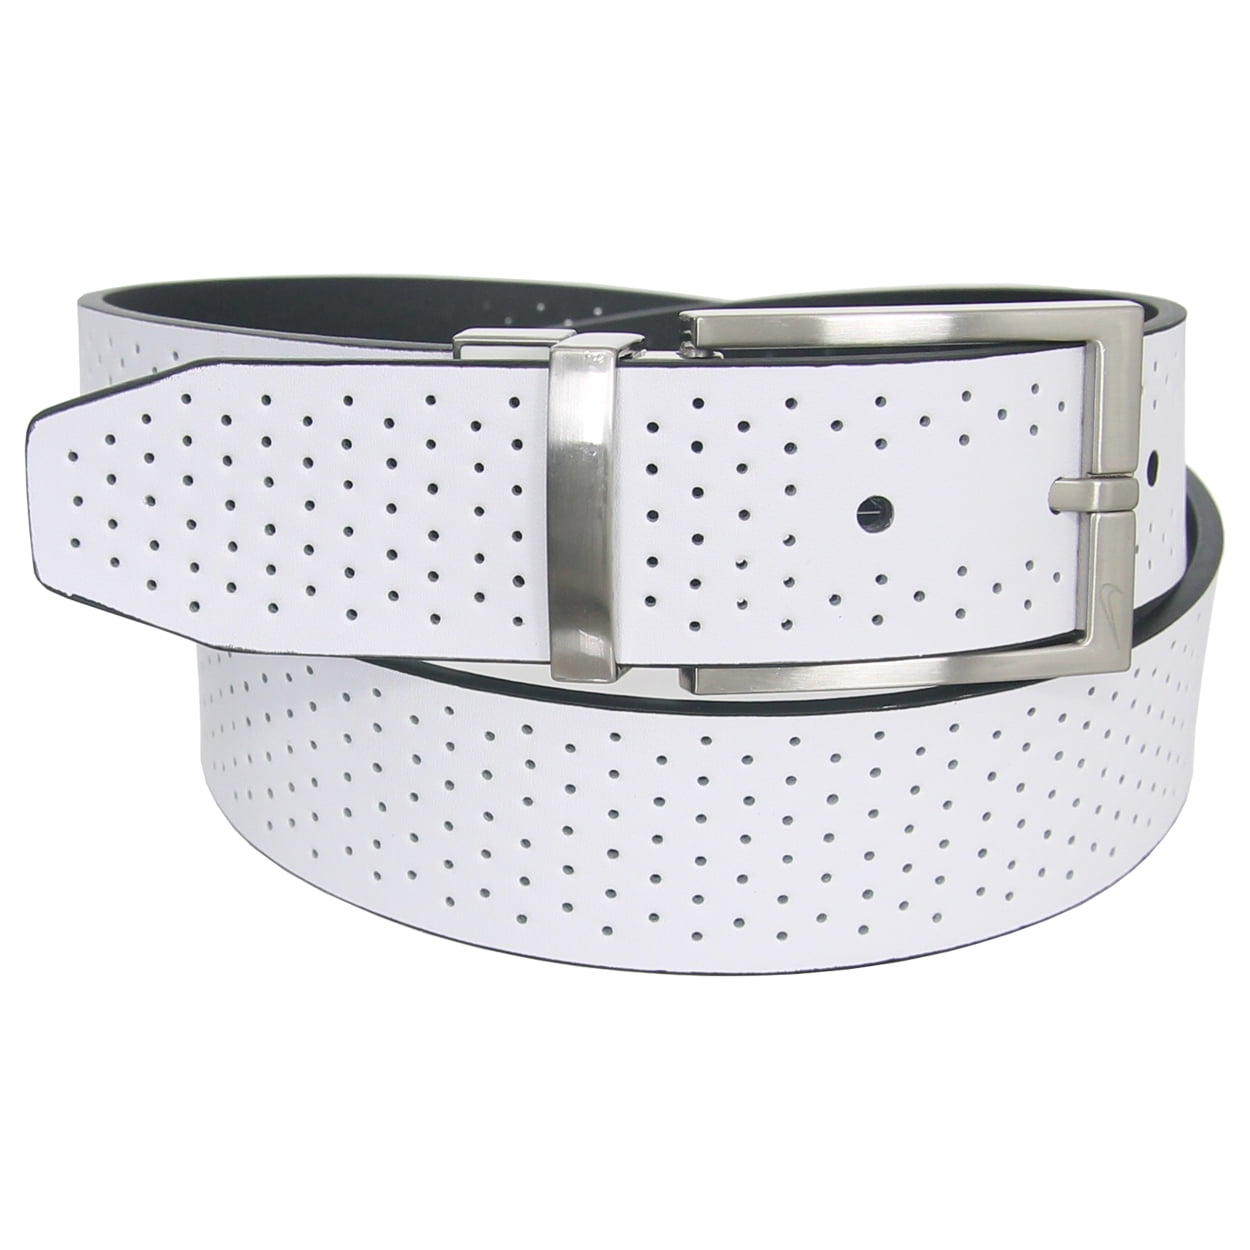 Nike Golf Men's Reversible Perforated Leather Belt, Brand NEW ...